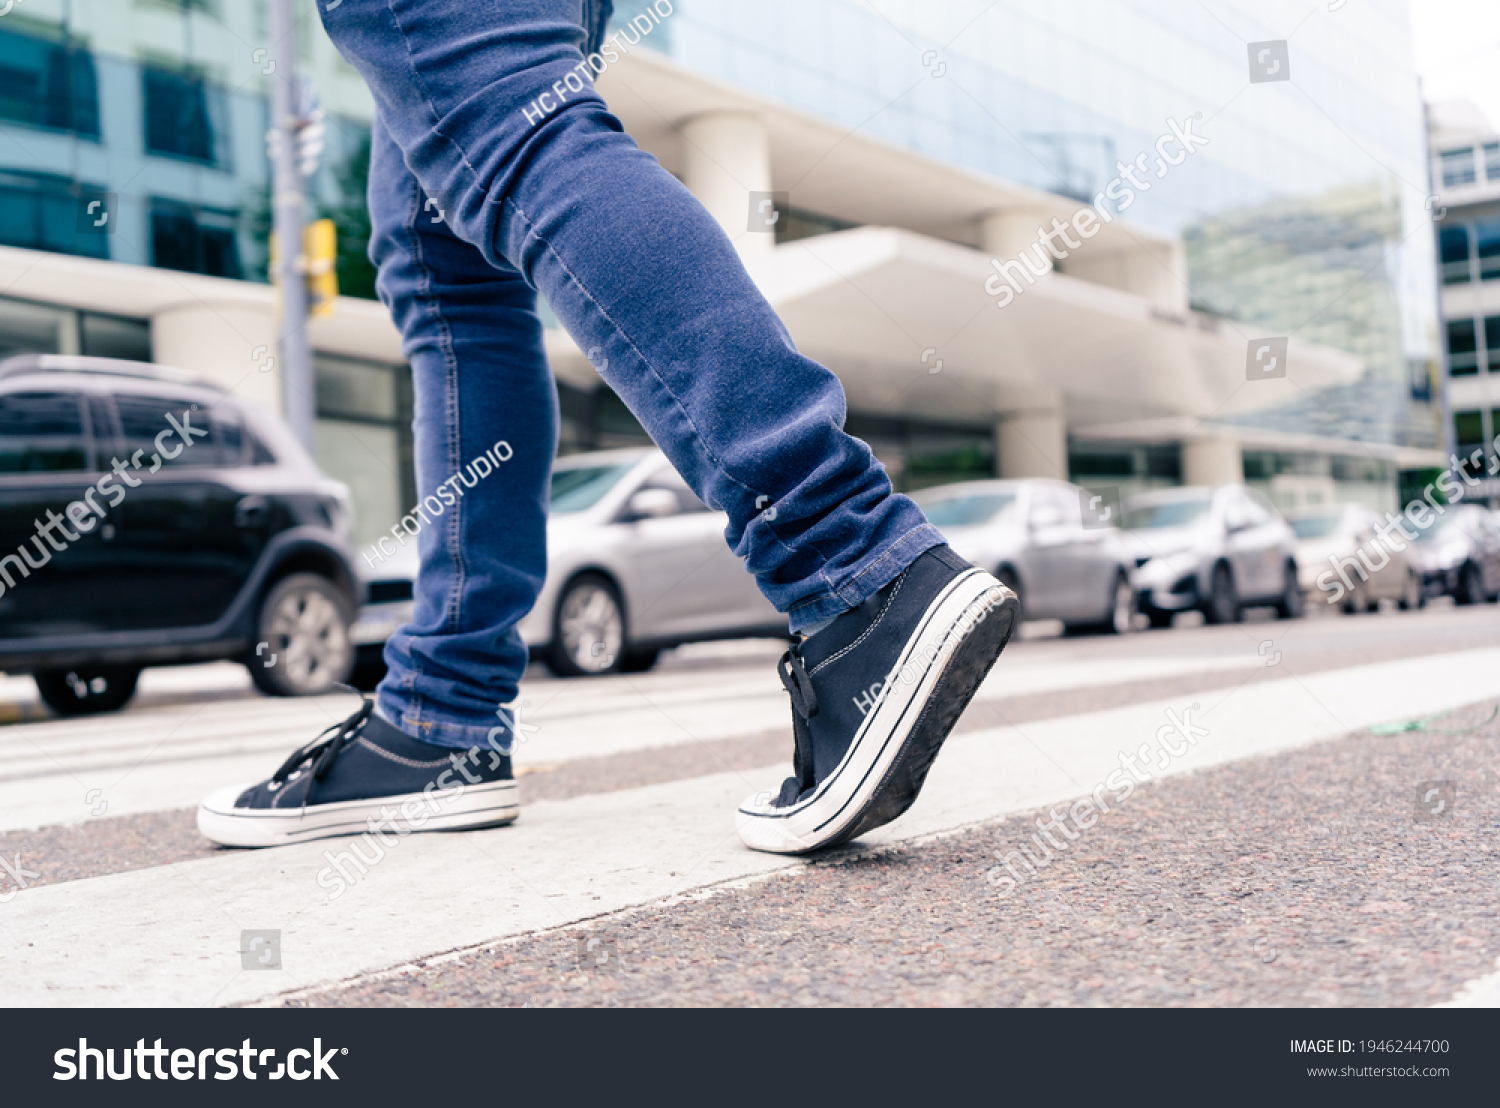 Close-up of the feet of a man in black sneakers crossing a street on the zebra or pedestrian path. #1946244700